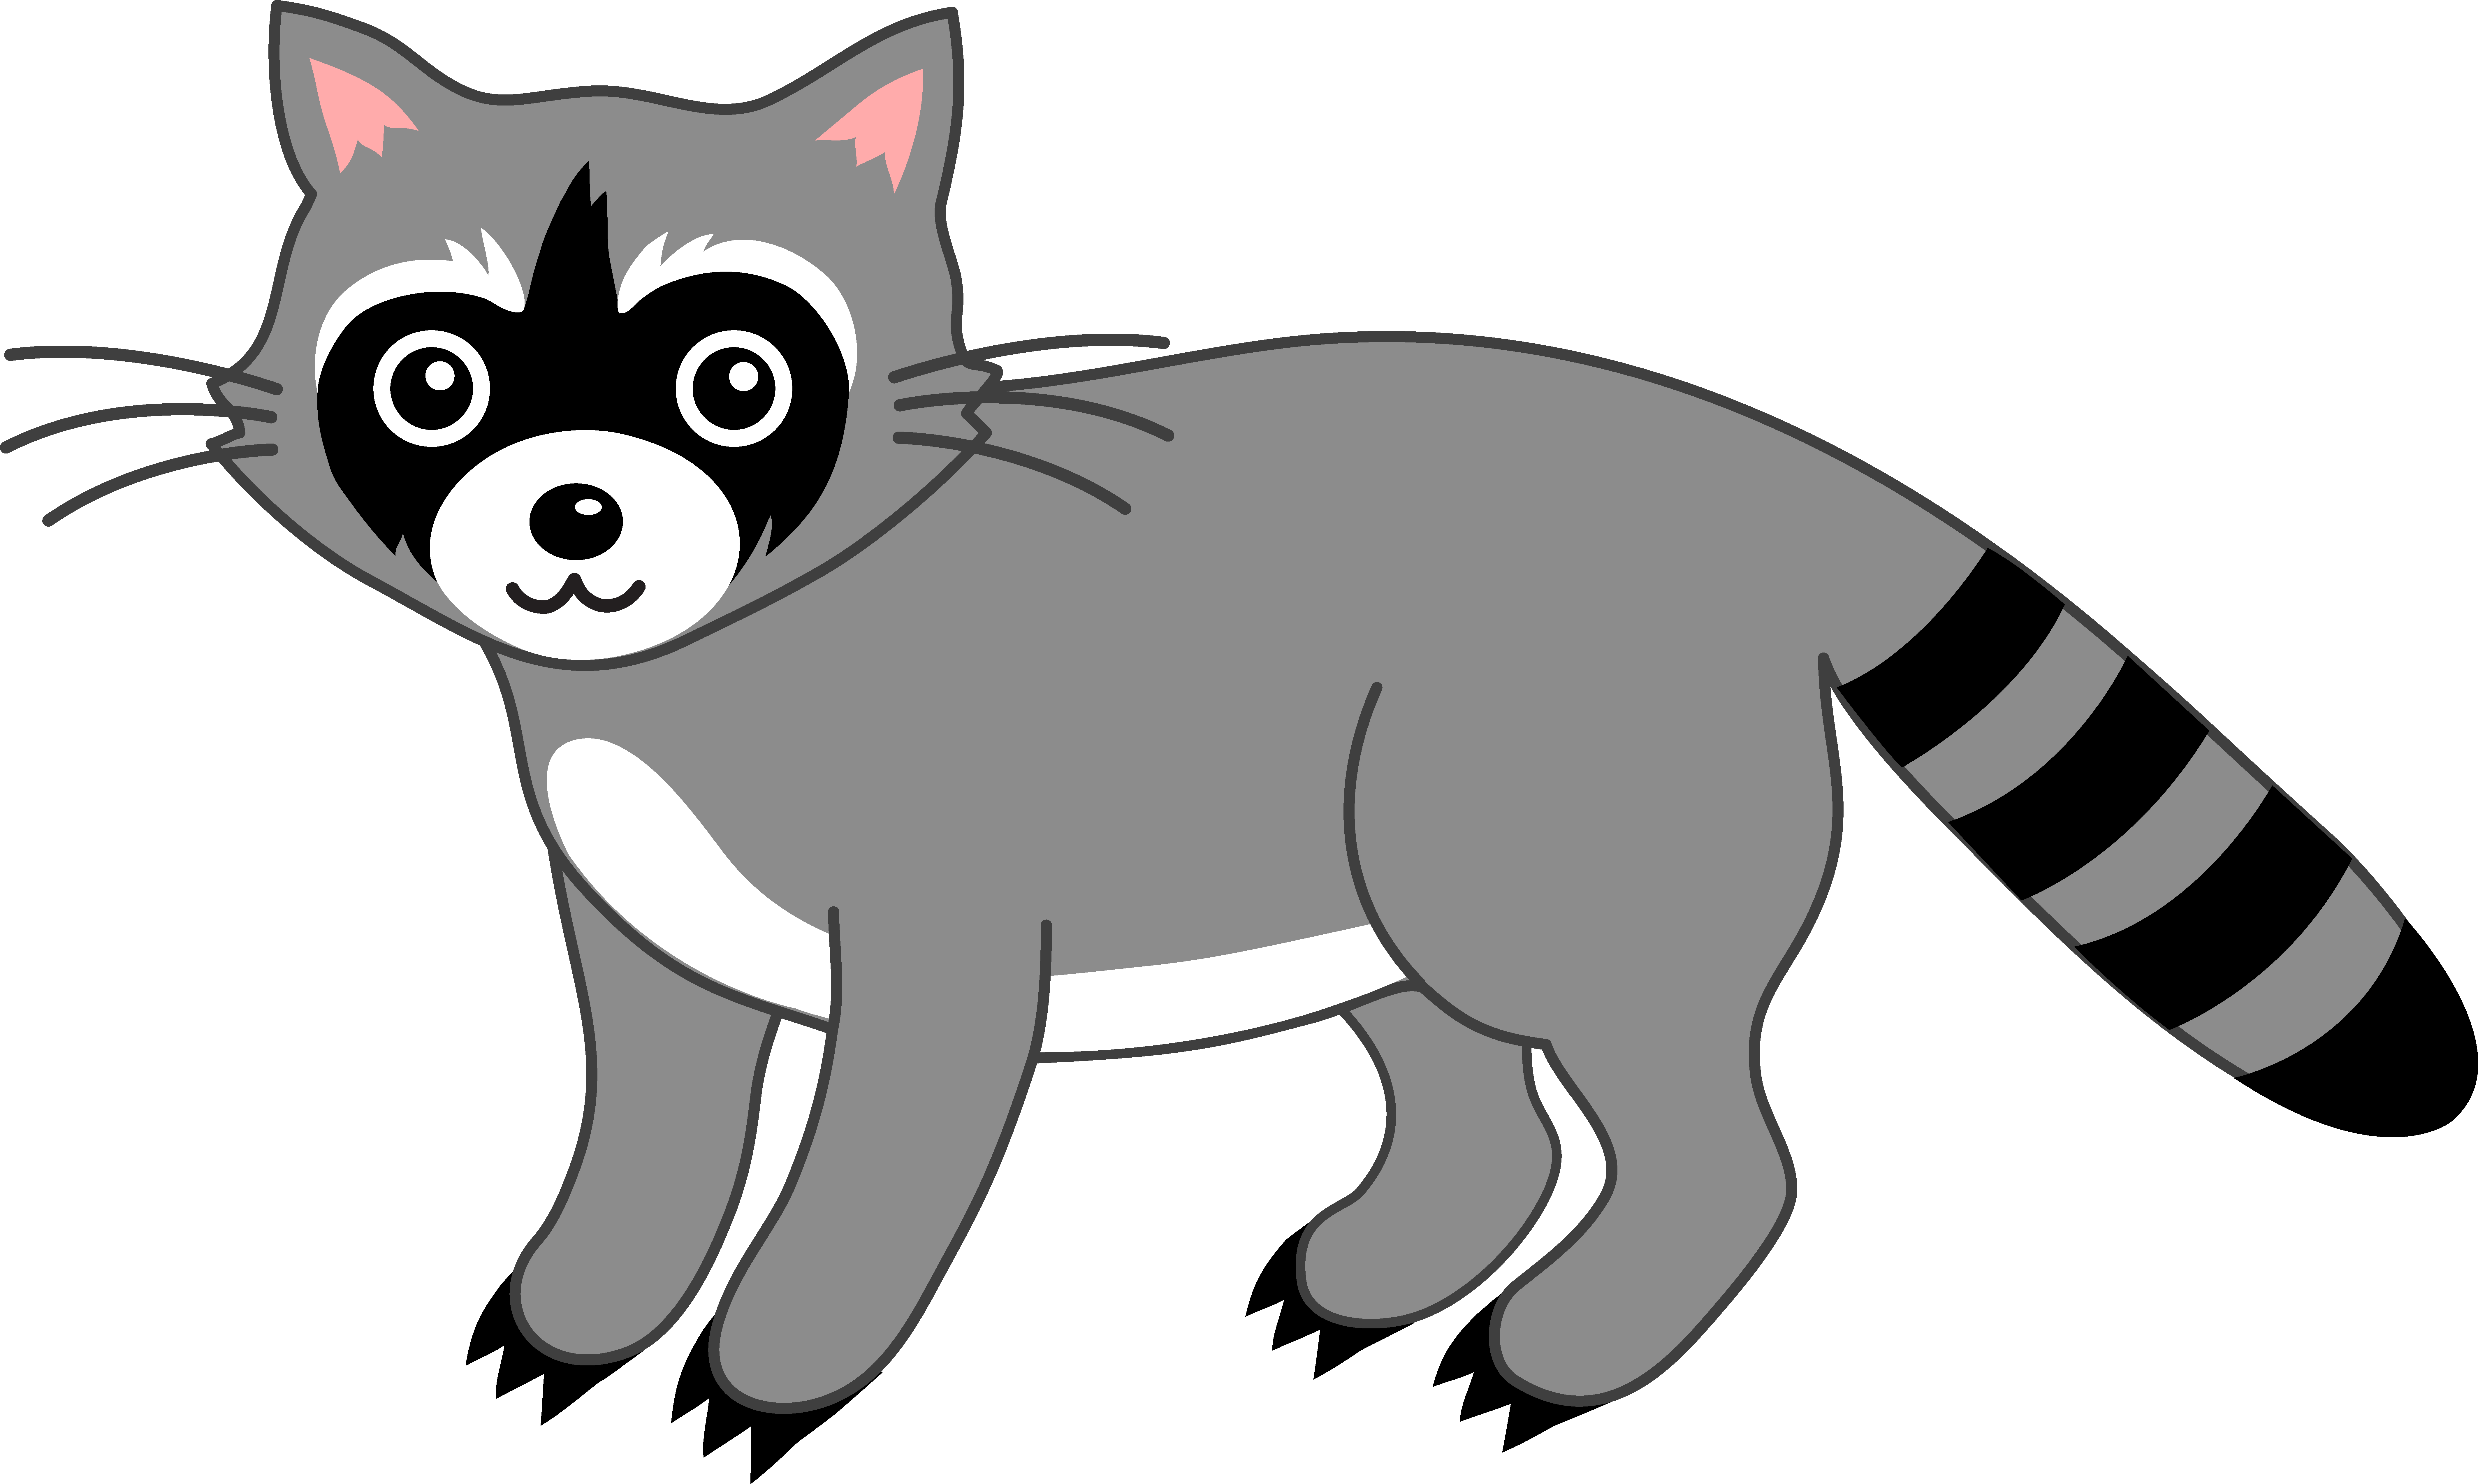 Racoon clipart #9, Download drawings